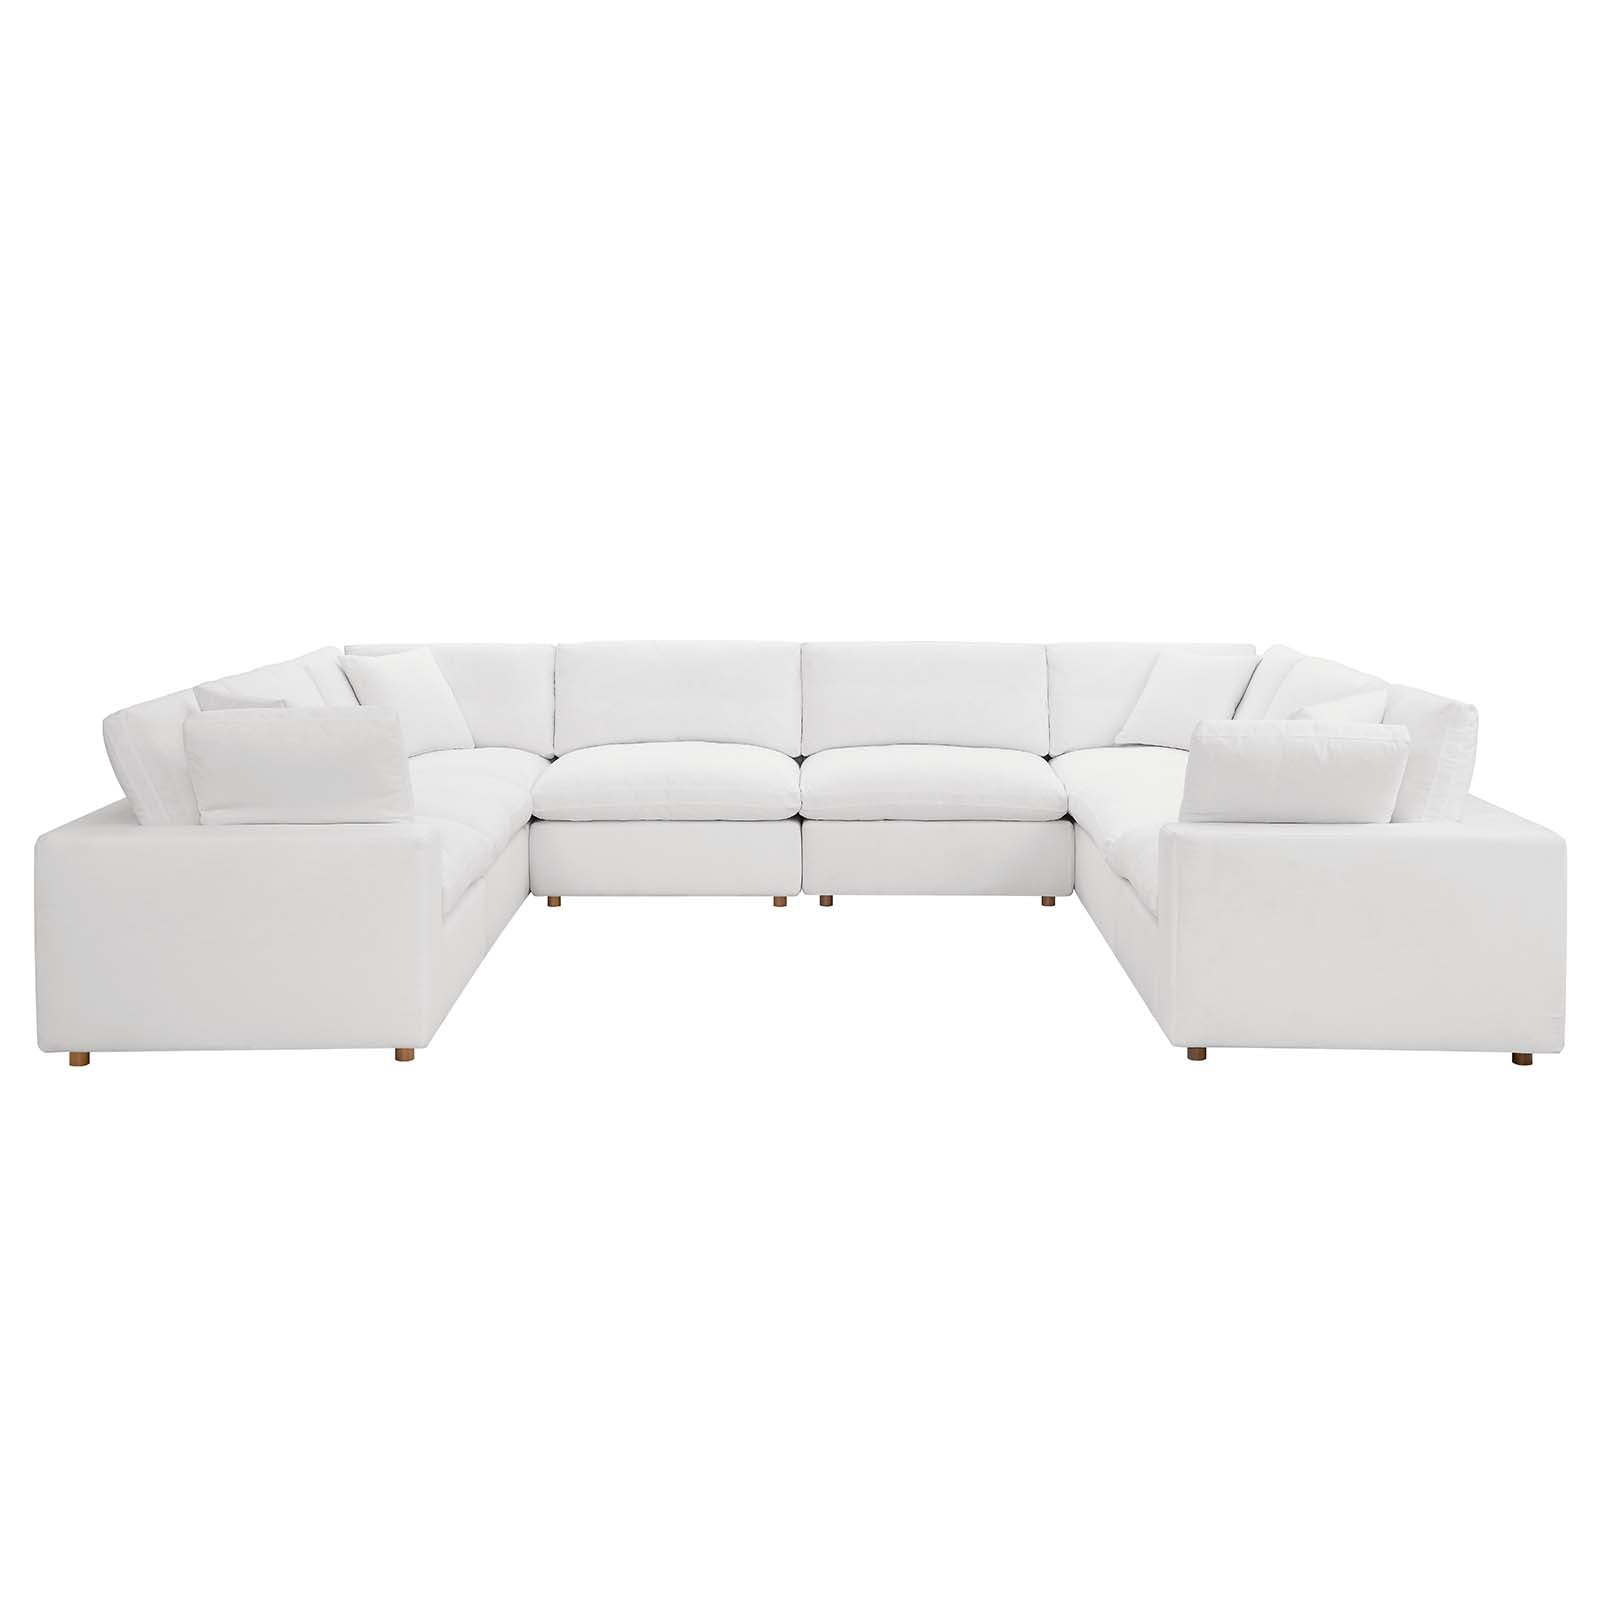 Commix Down Filled Overstuffed 8 Piece Sectional Sofa Set